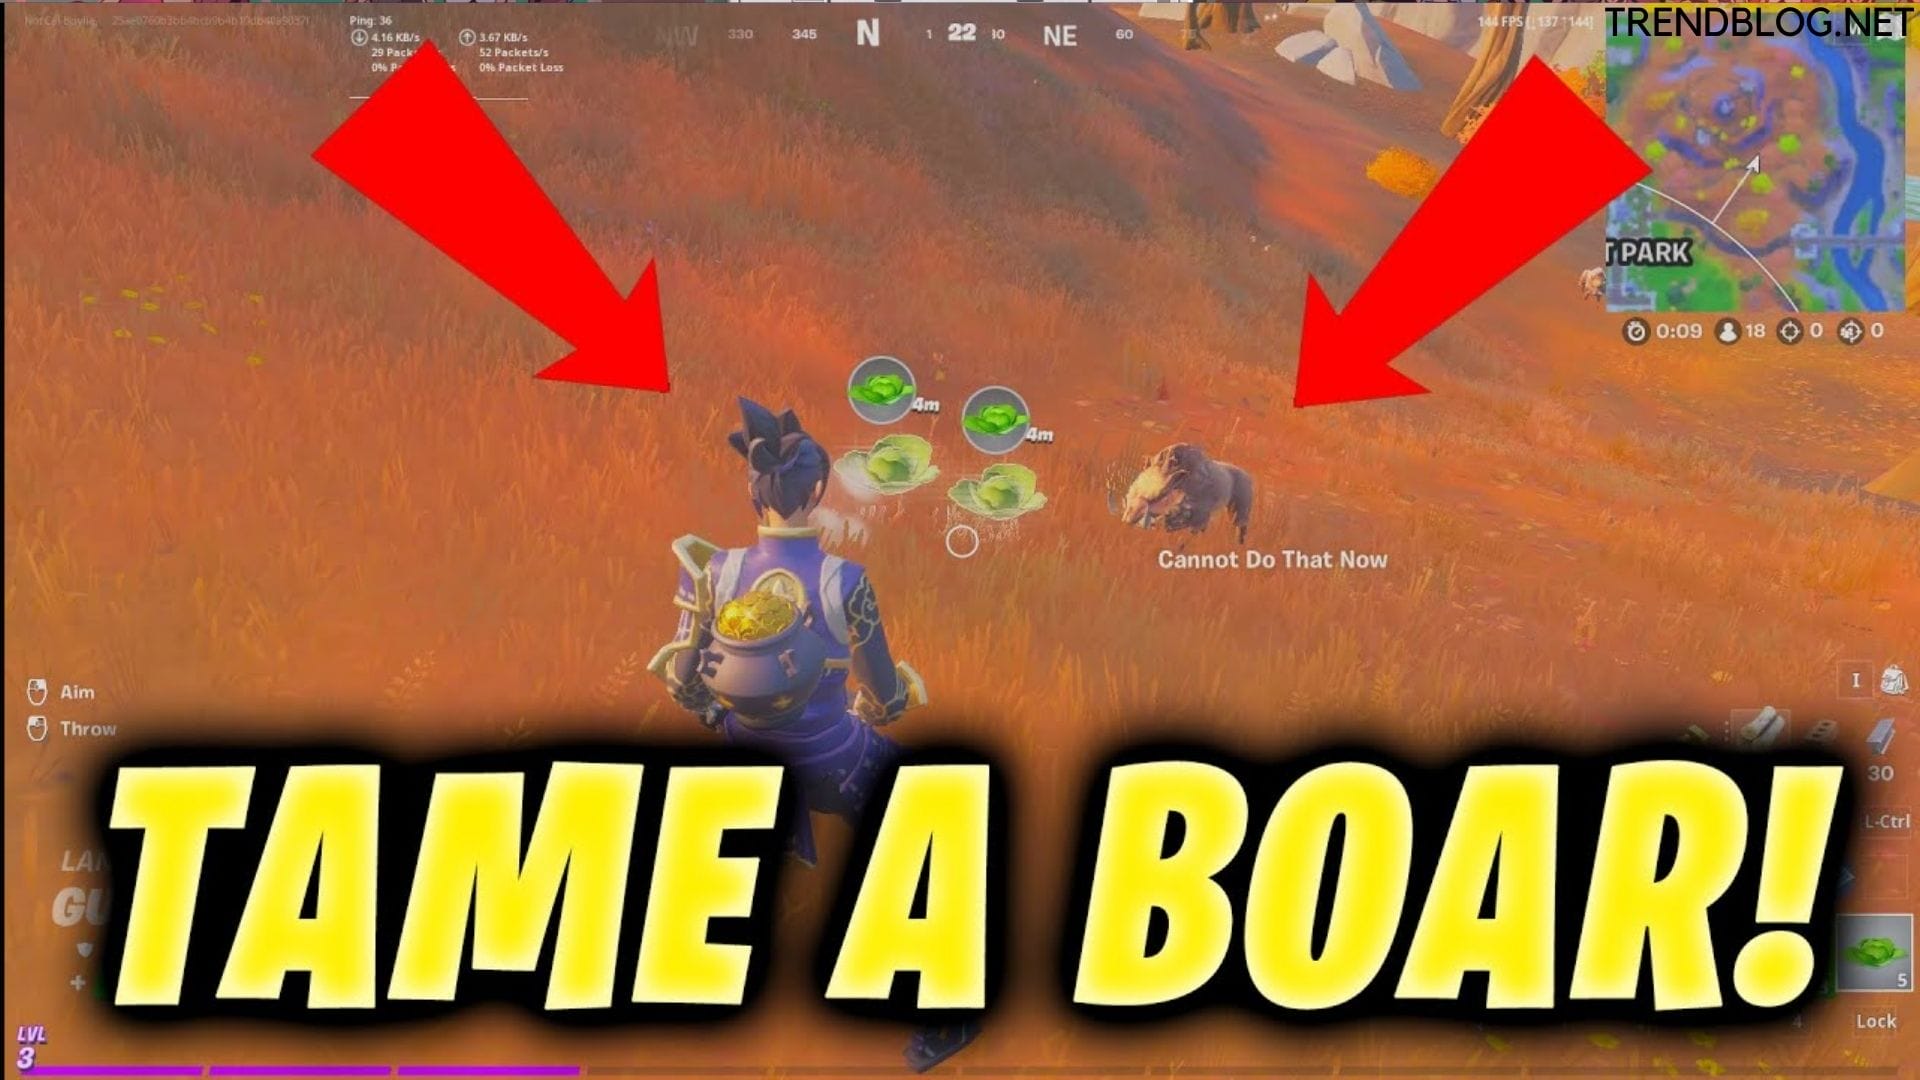  In Fortnite, How Can You Tame a Boar?